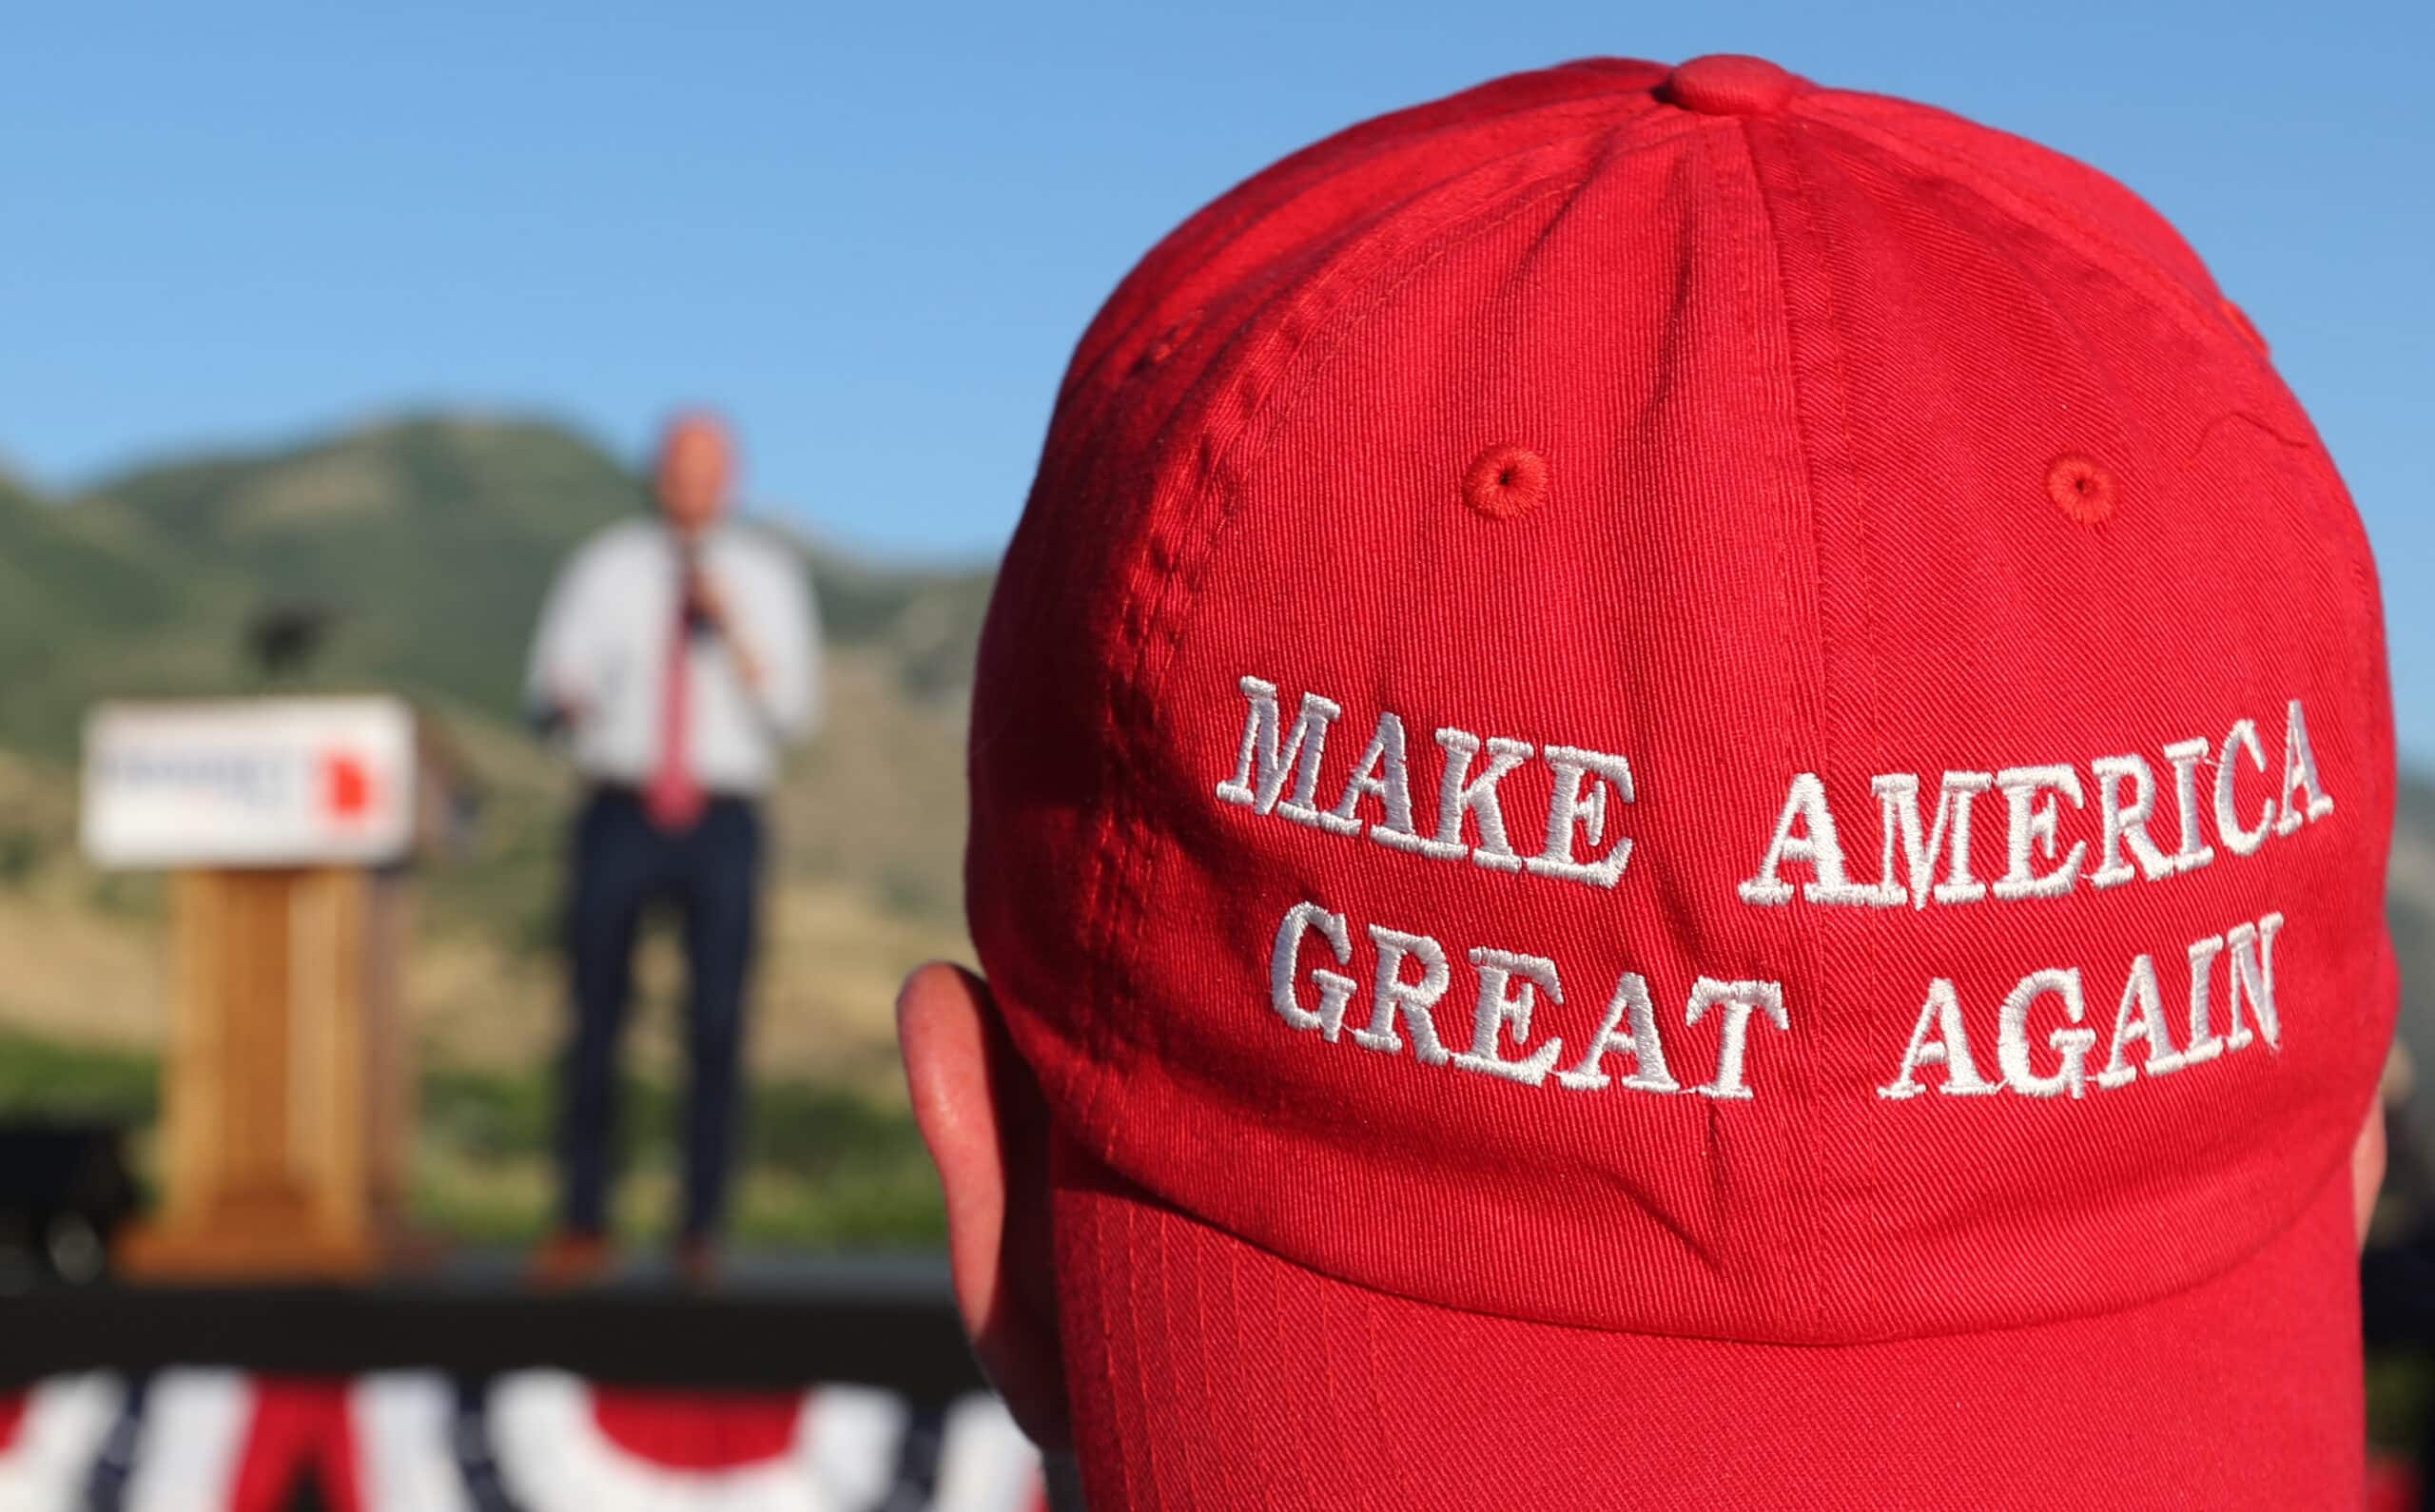 OREM, UT - JUNE 26: A Romney supporter listens to a speaker as he wears a "Make America Great Again" hat at the Mitt Romney election party on June 26, 2018 in Orem, Utah. It is primary election day in Utah and Romney is running for the Utah U.S. Senate seat of Senator Orin Hatch who is retiring. 